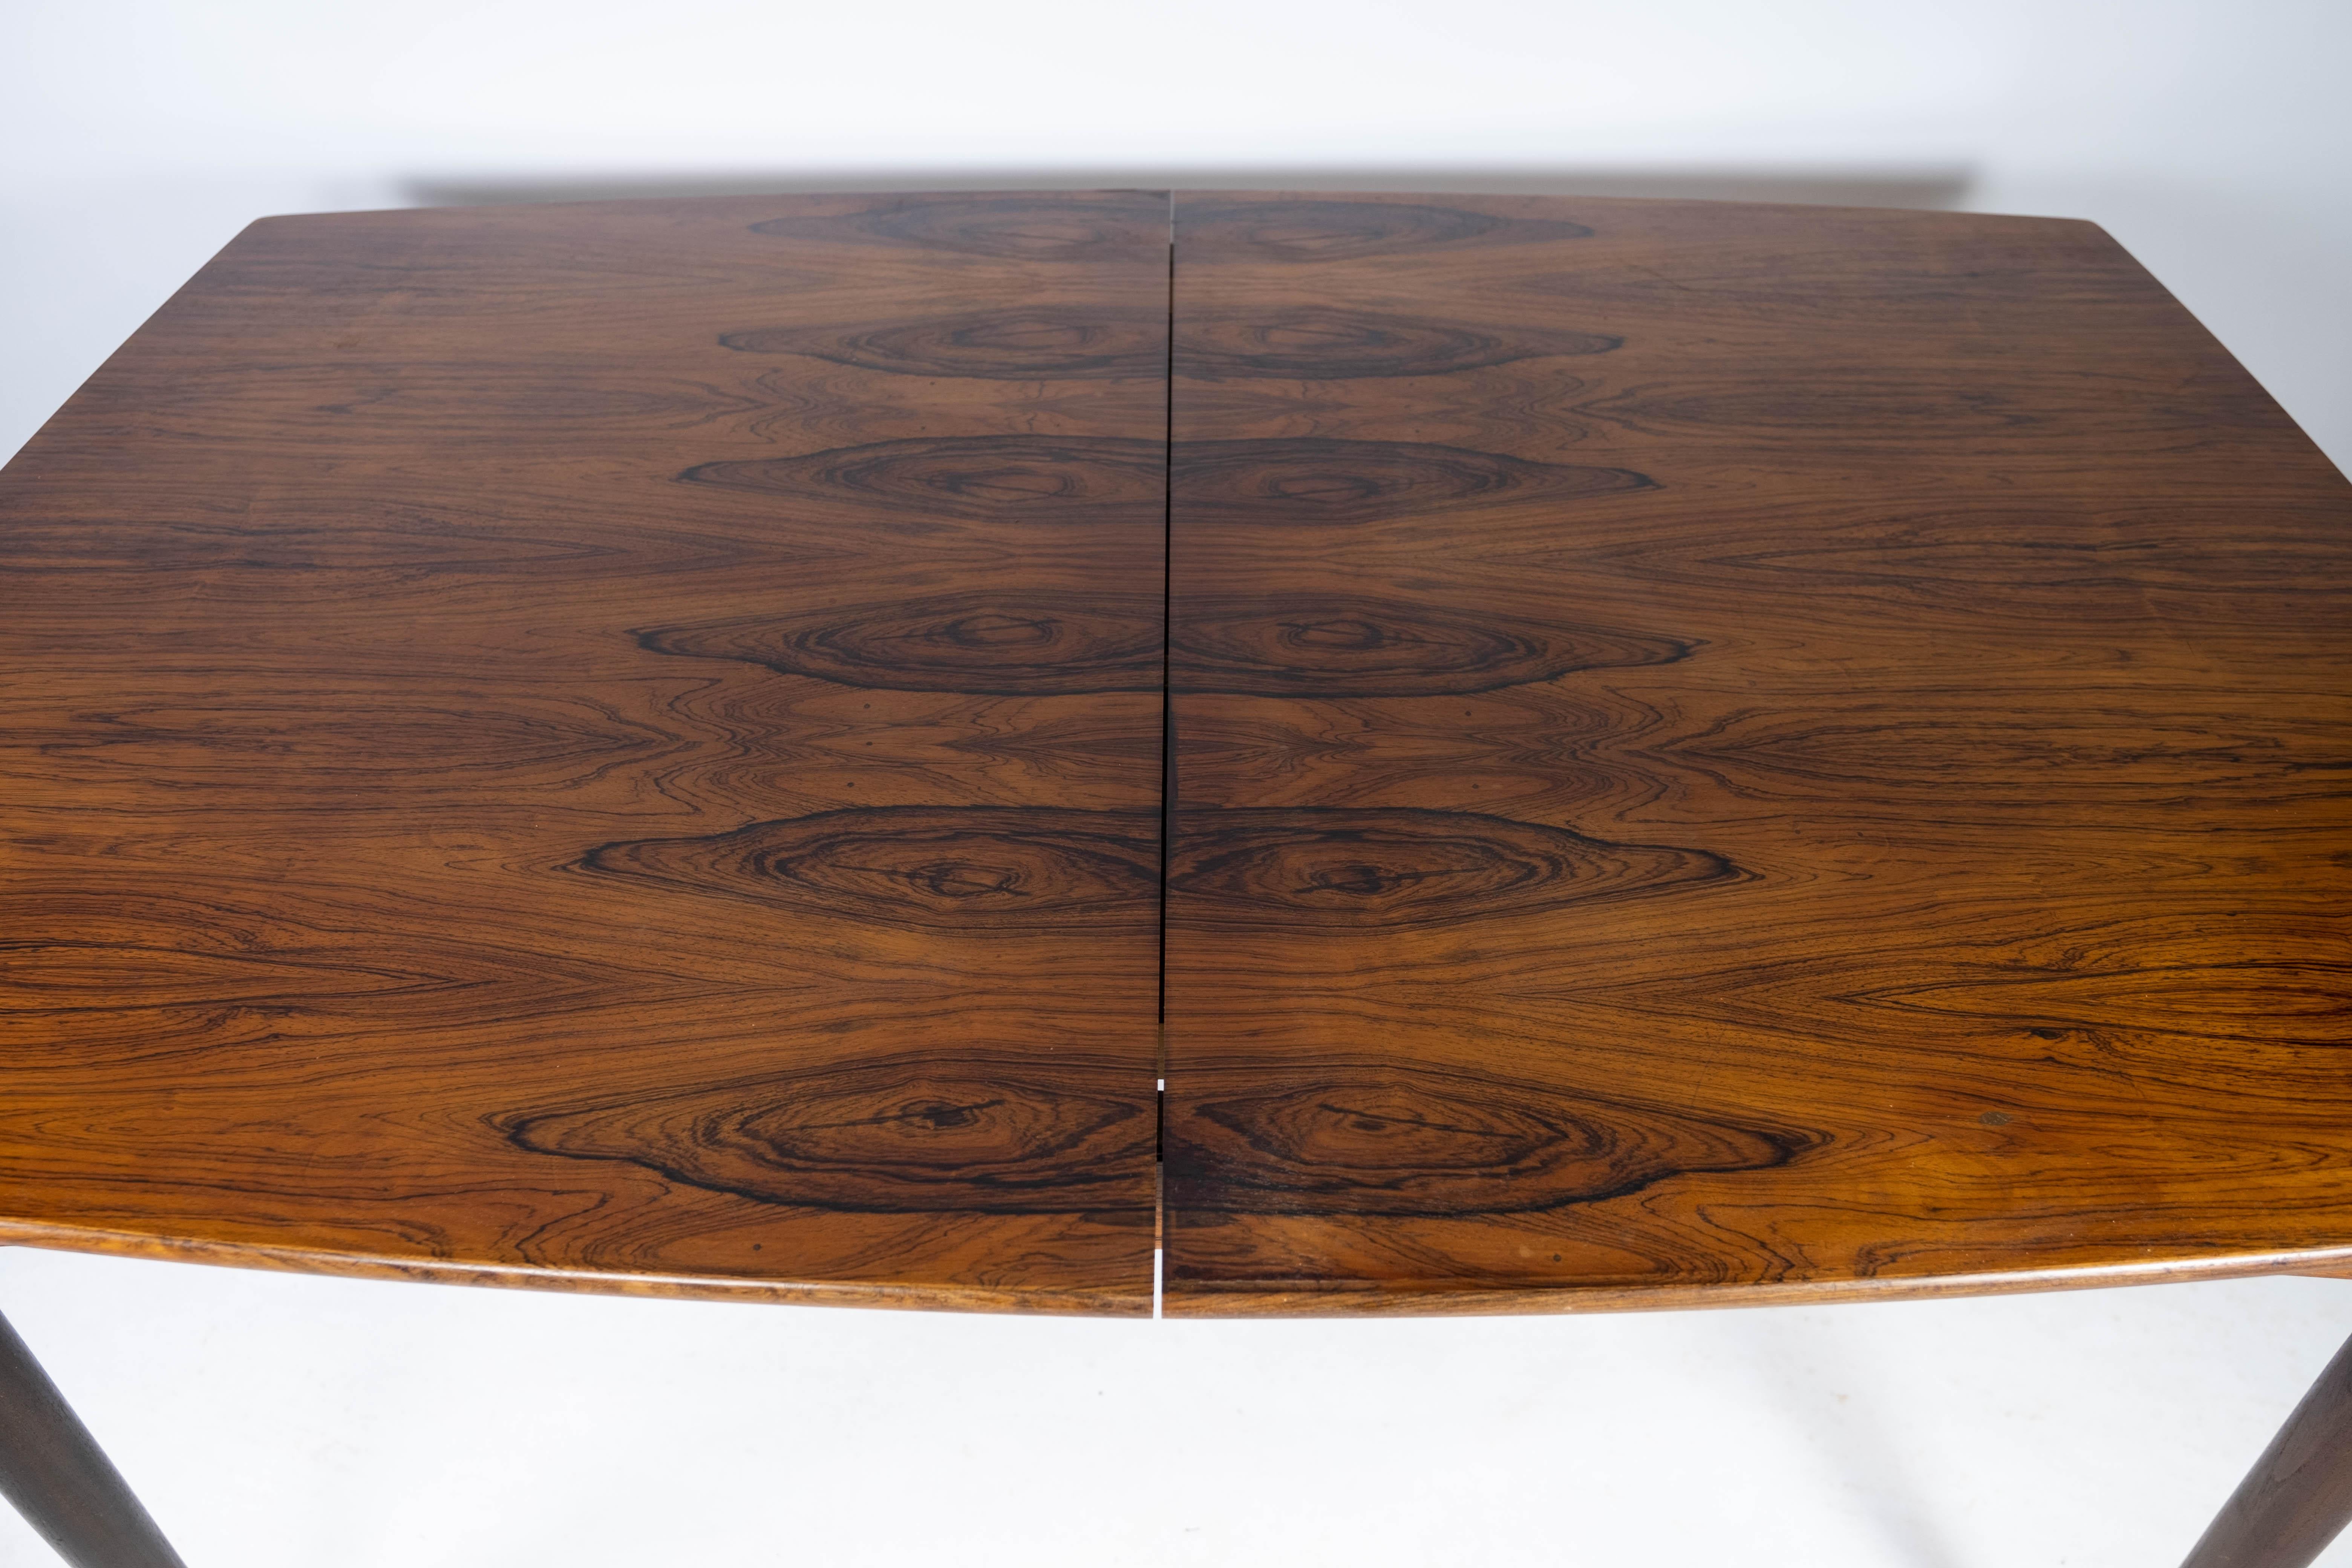 Scandinavian Modern Dining Table in Rosewood with Extensions, of Danish Design from the 1960s